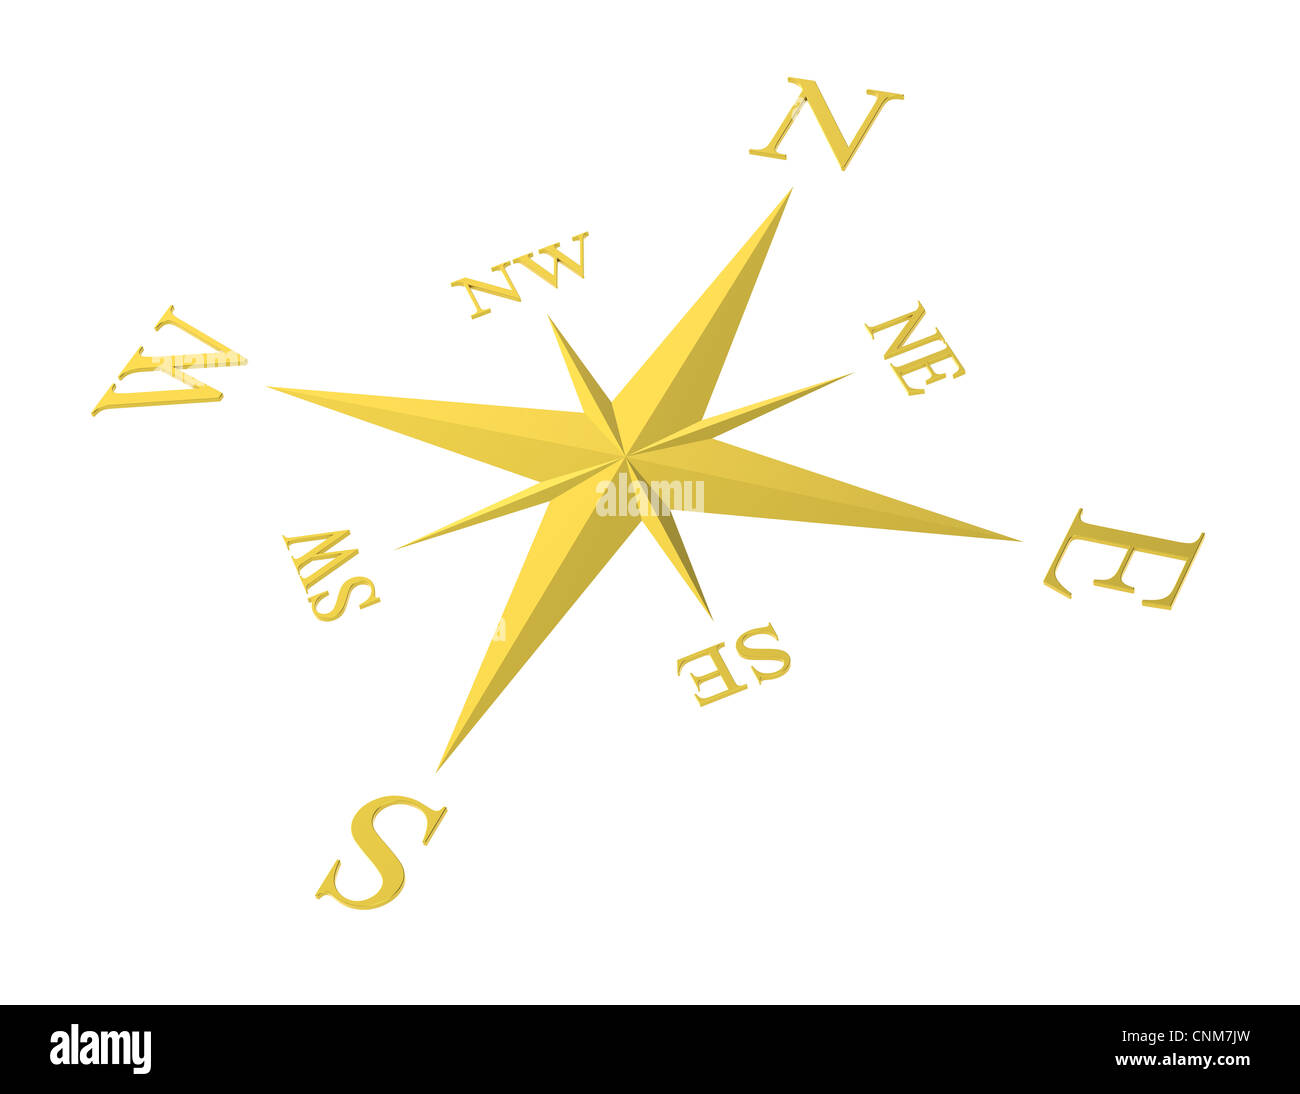 A golden Compass rose. White background. Stock Photo